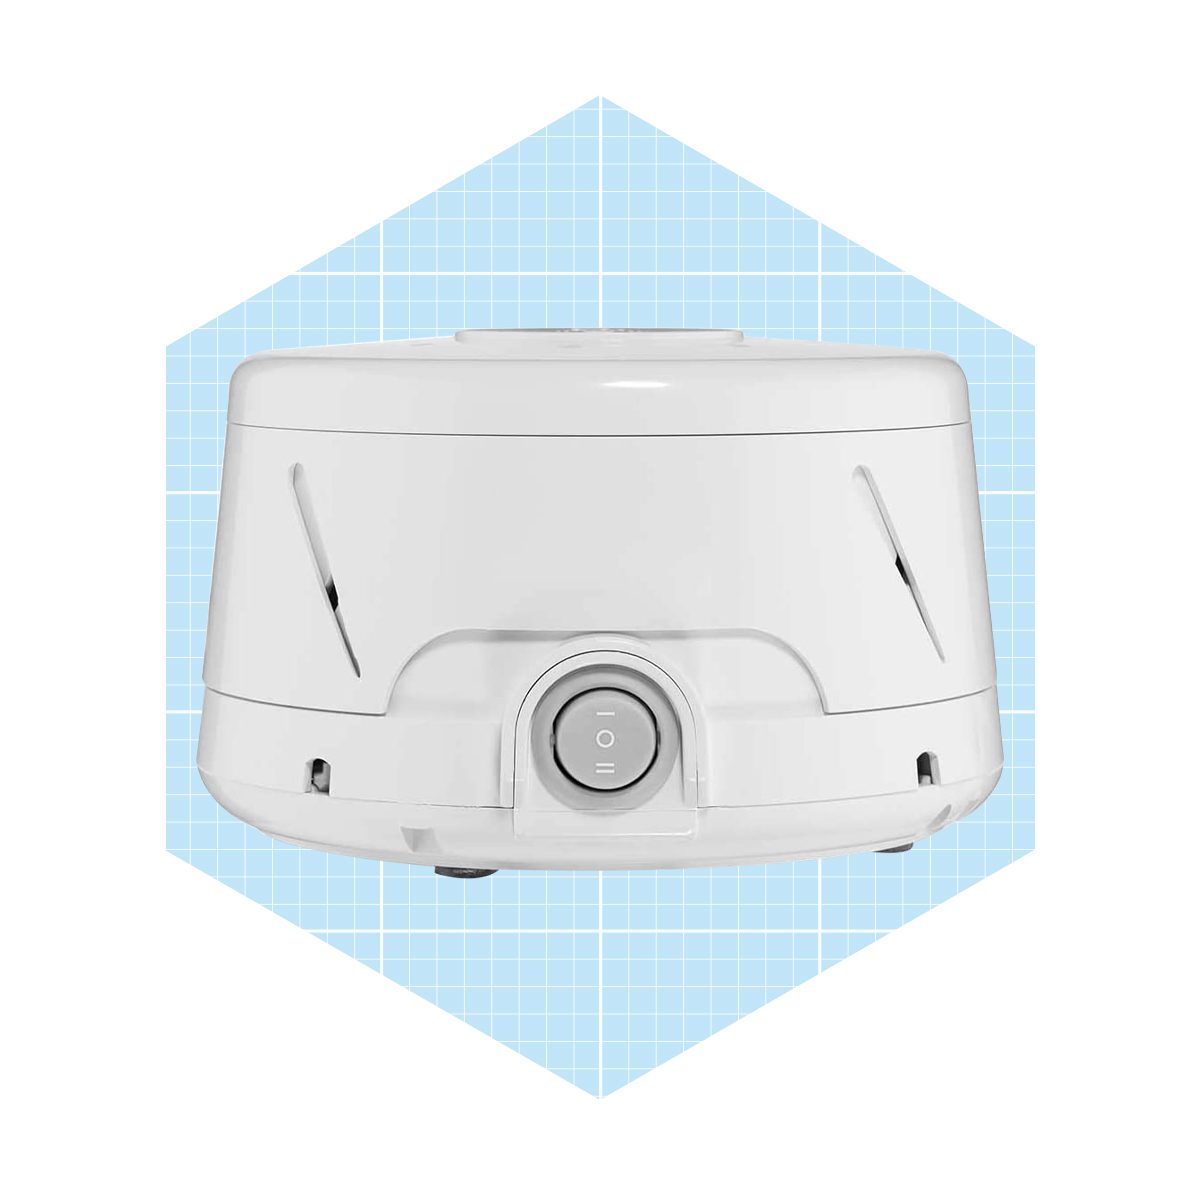 Marpac Dohm Classic The Original White Noise Machine Featuring Soothing Natural Sound From A Real Fan Ecomm Amazon.com